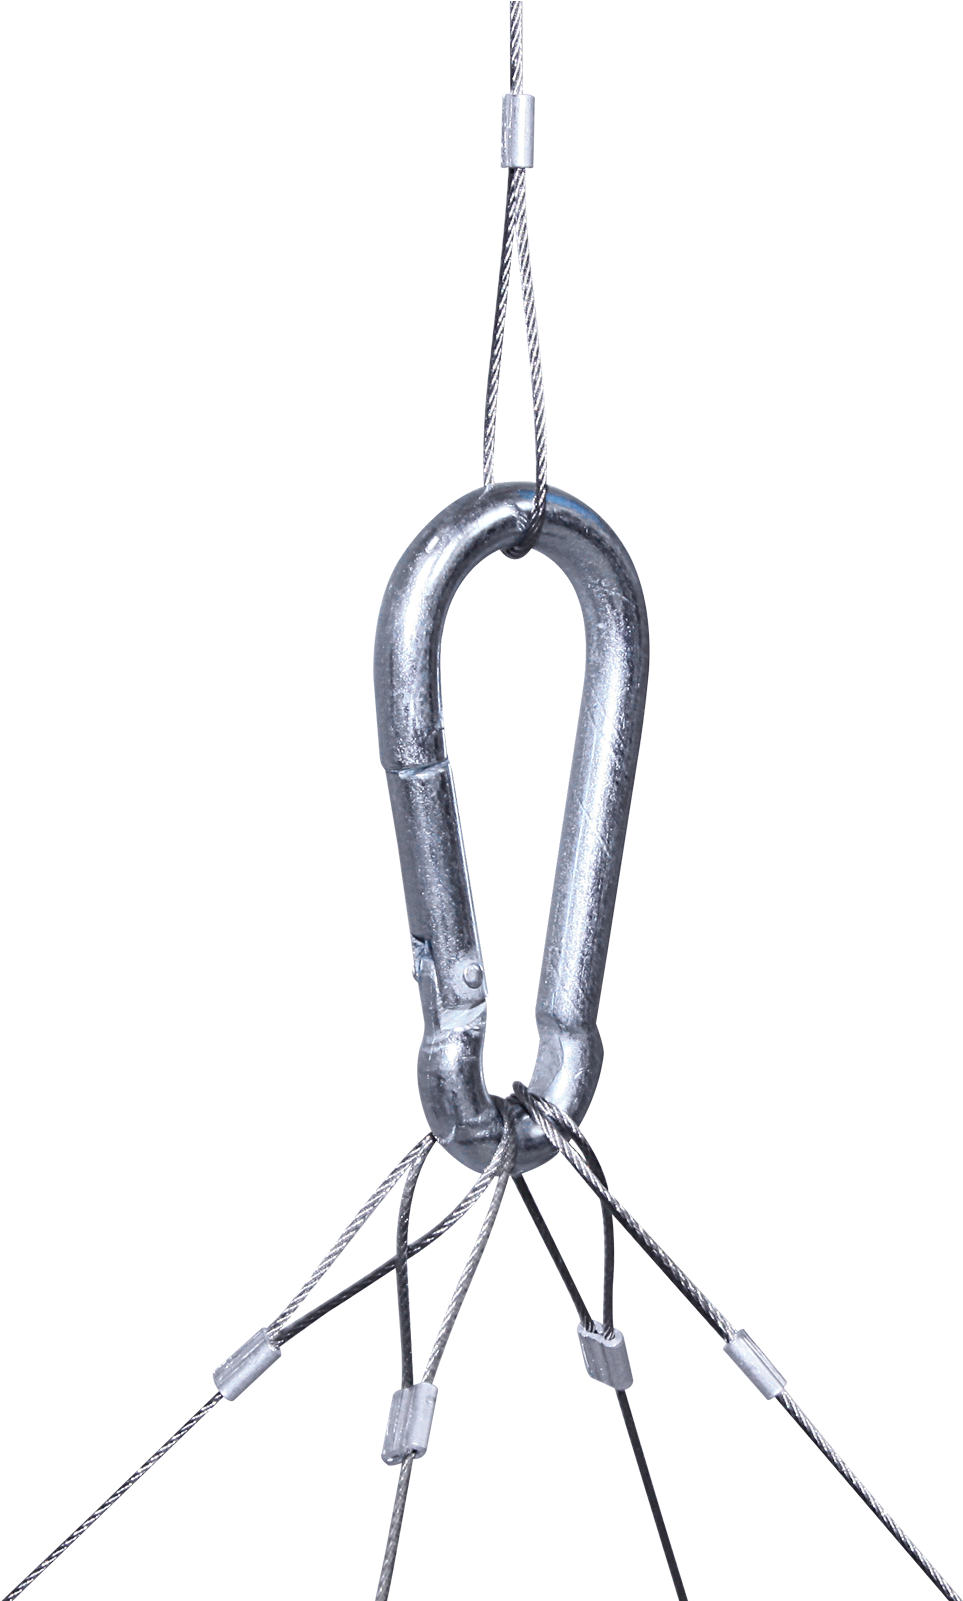 Carabiner Snap Hook The Carabiner Snap Hook Is Commonly - Chain (1829x1600)